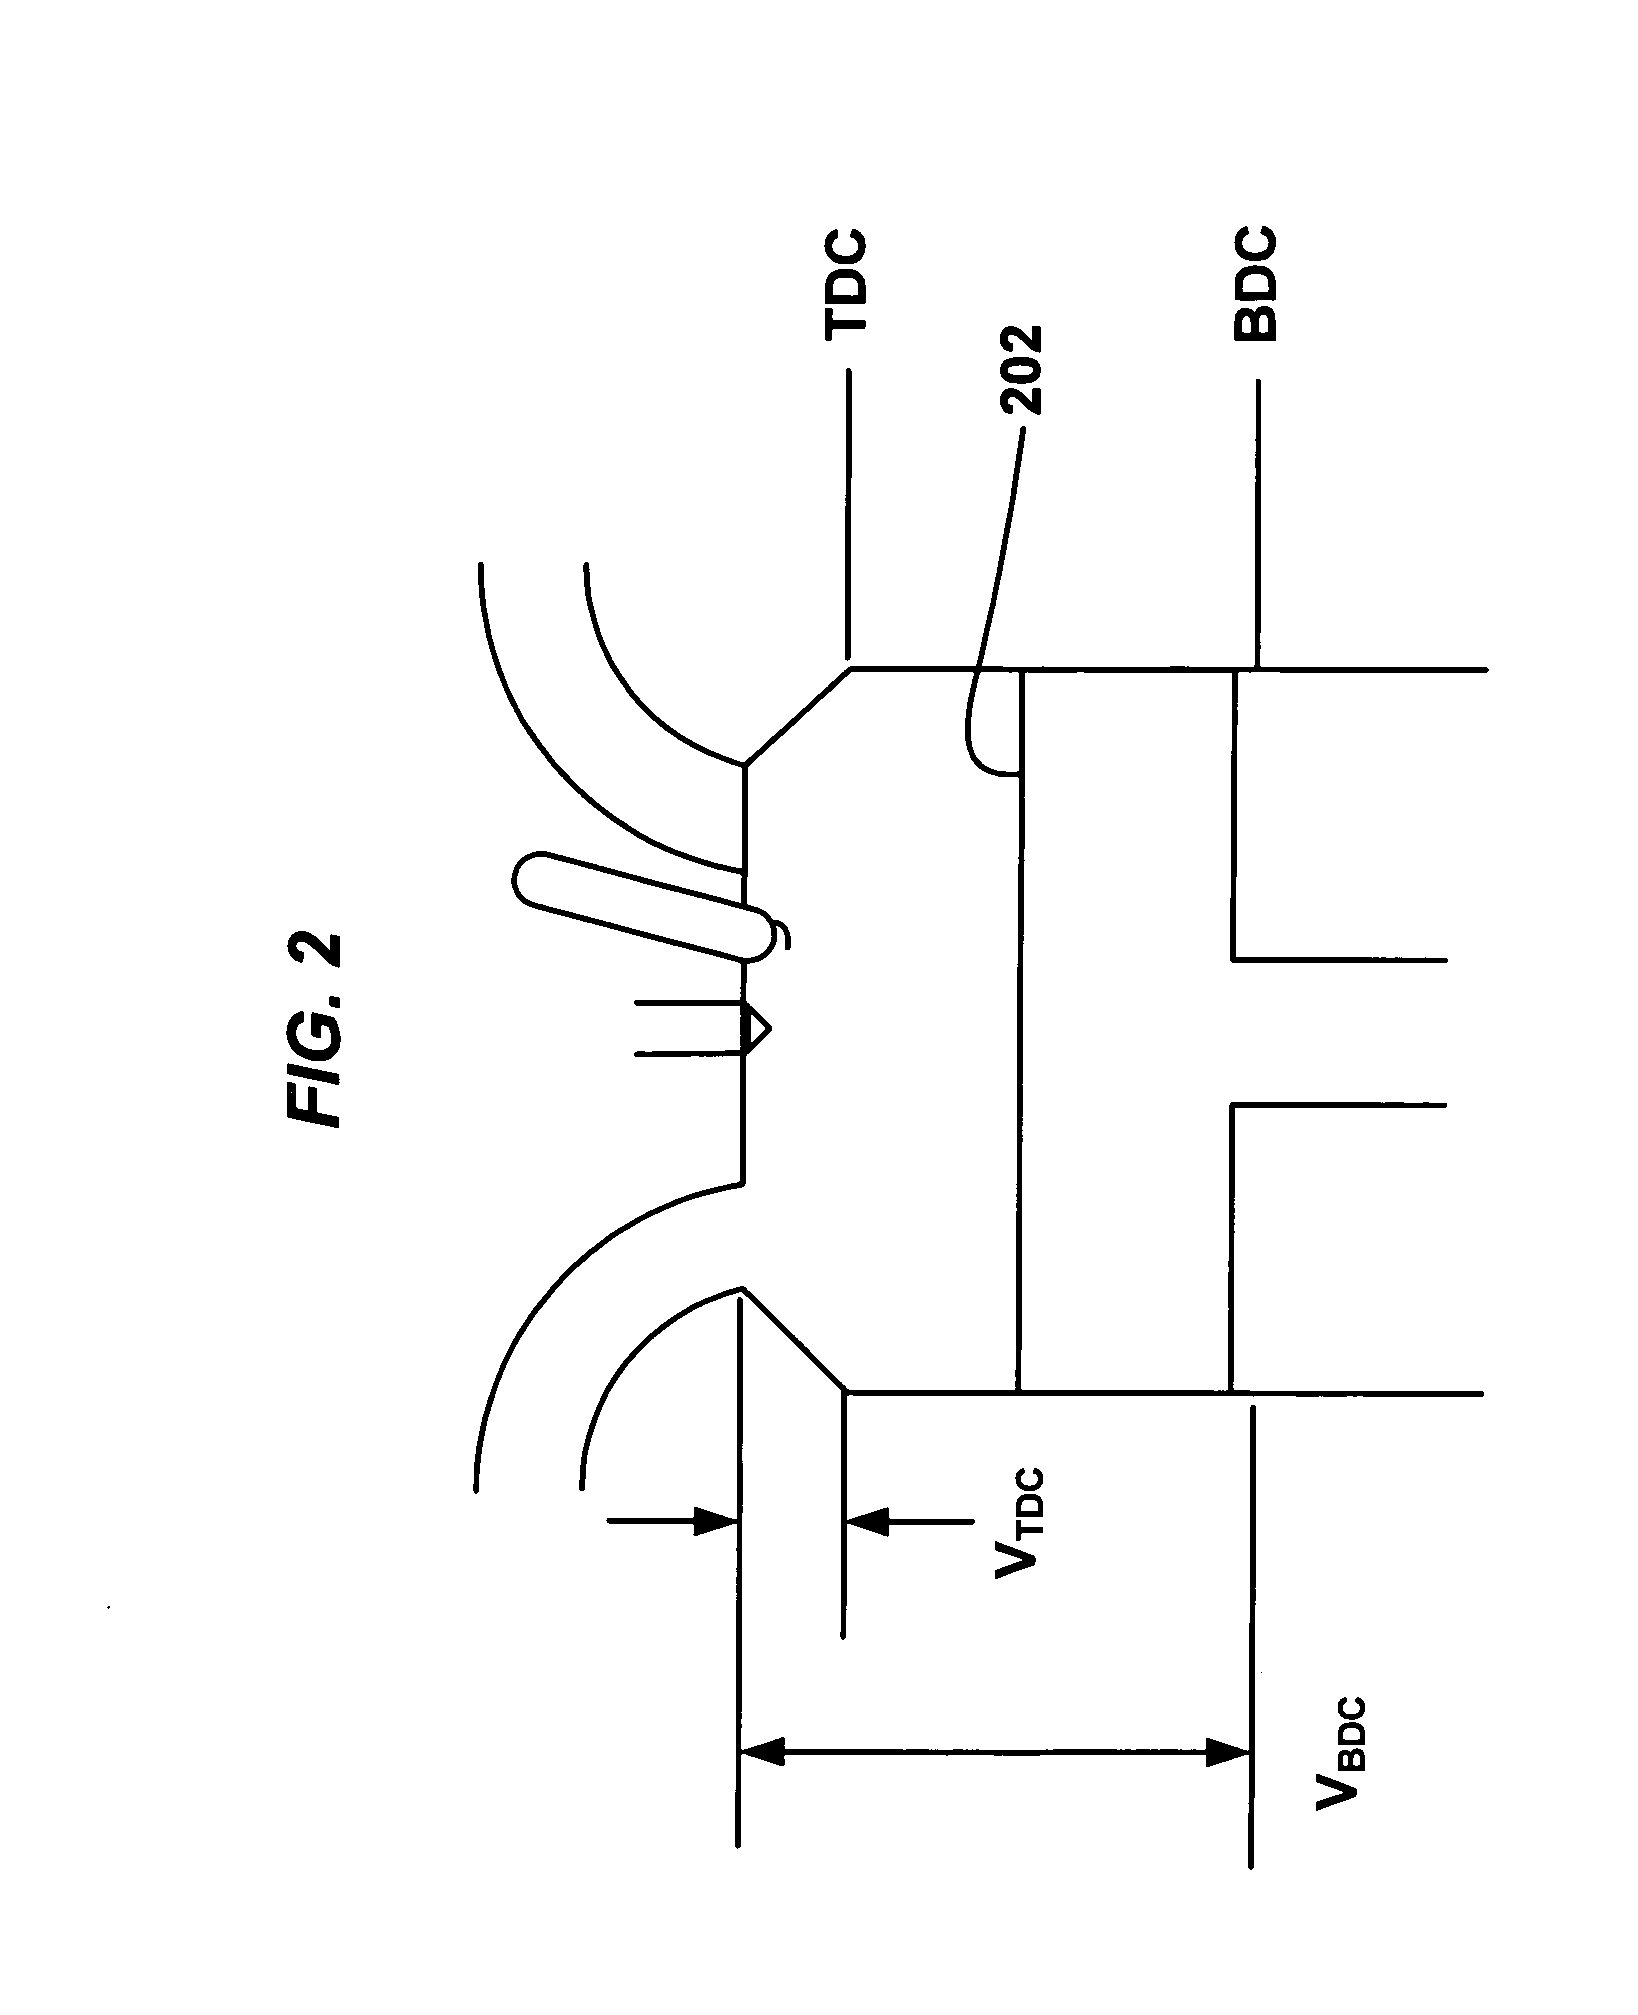 Stratified Charge Gasoline Direct Injection Systems Using Exhaust Gas Recirculation